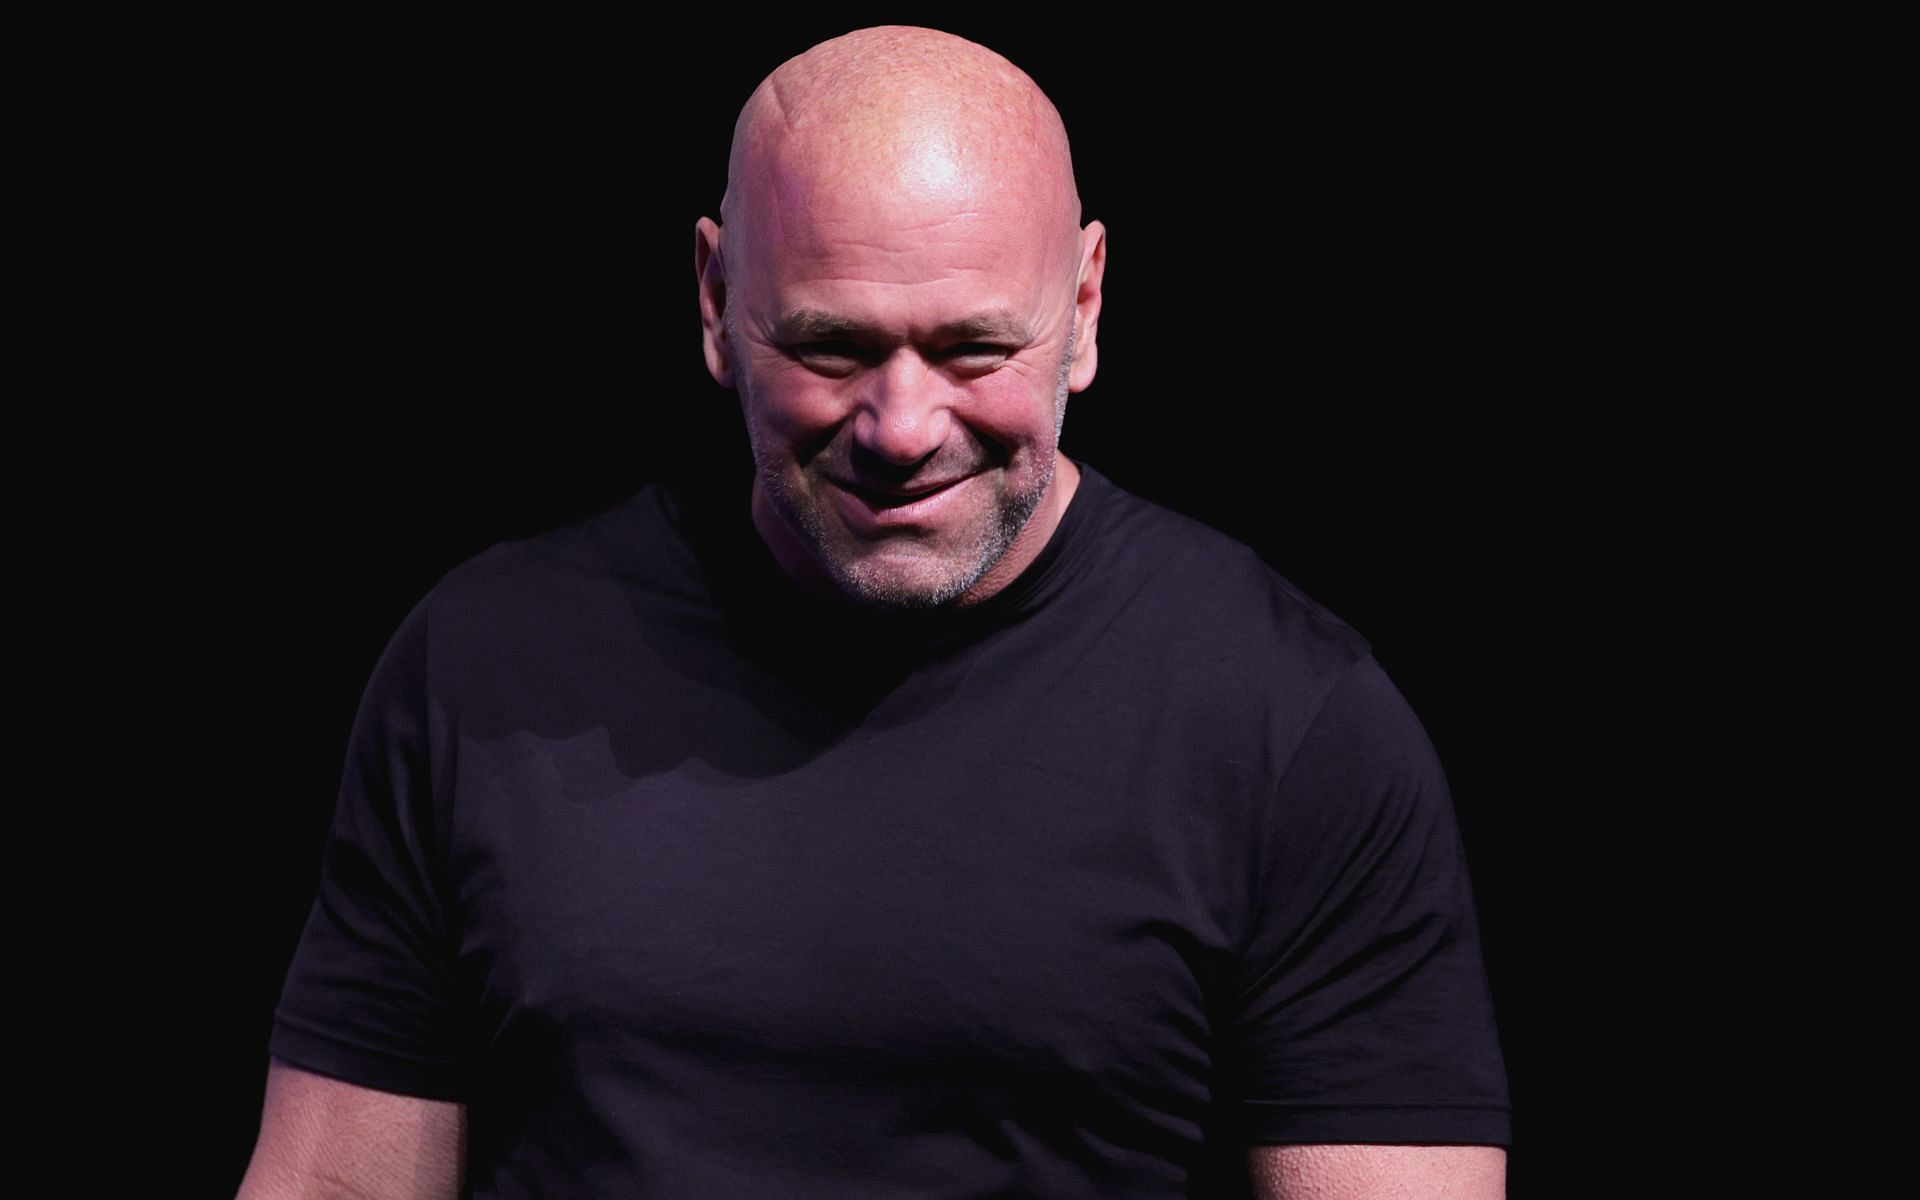 Dana White has often praised UFC parent company Endeavor for its visionary approach towards business [Image courtesy: Getty Images]